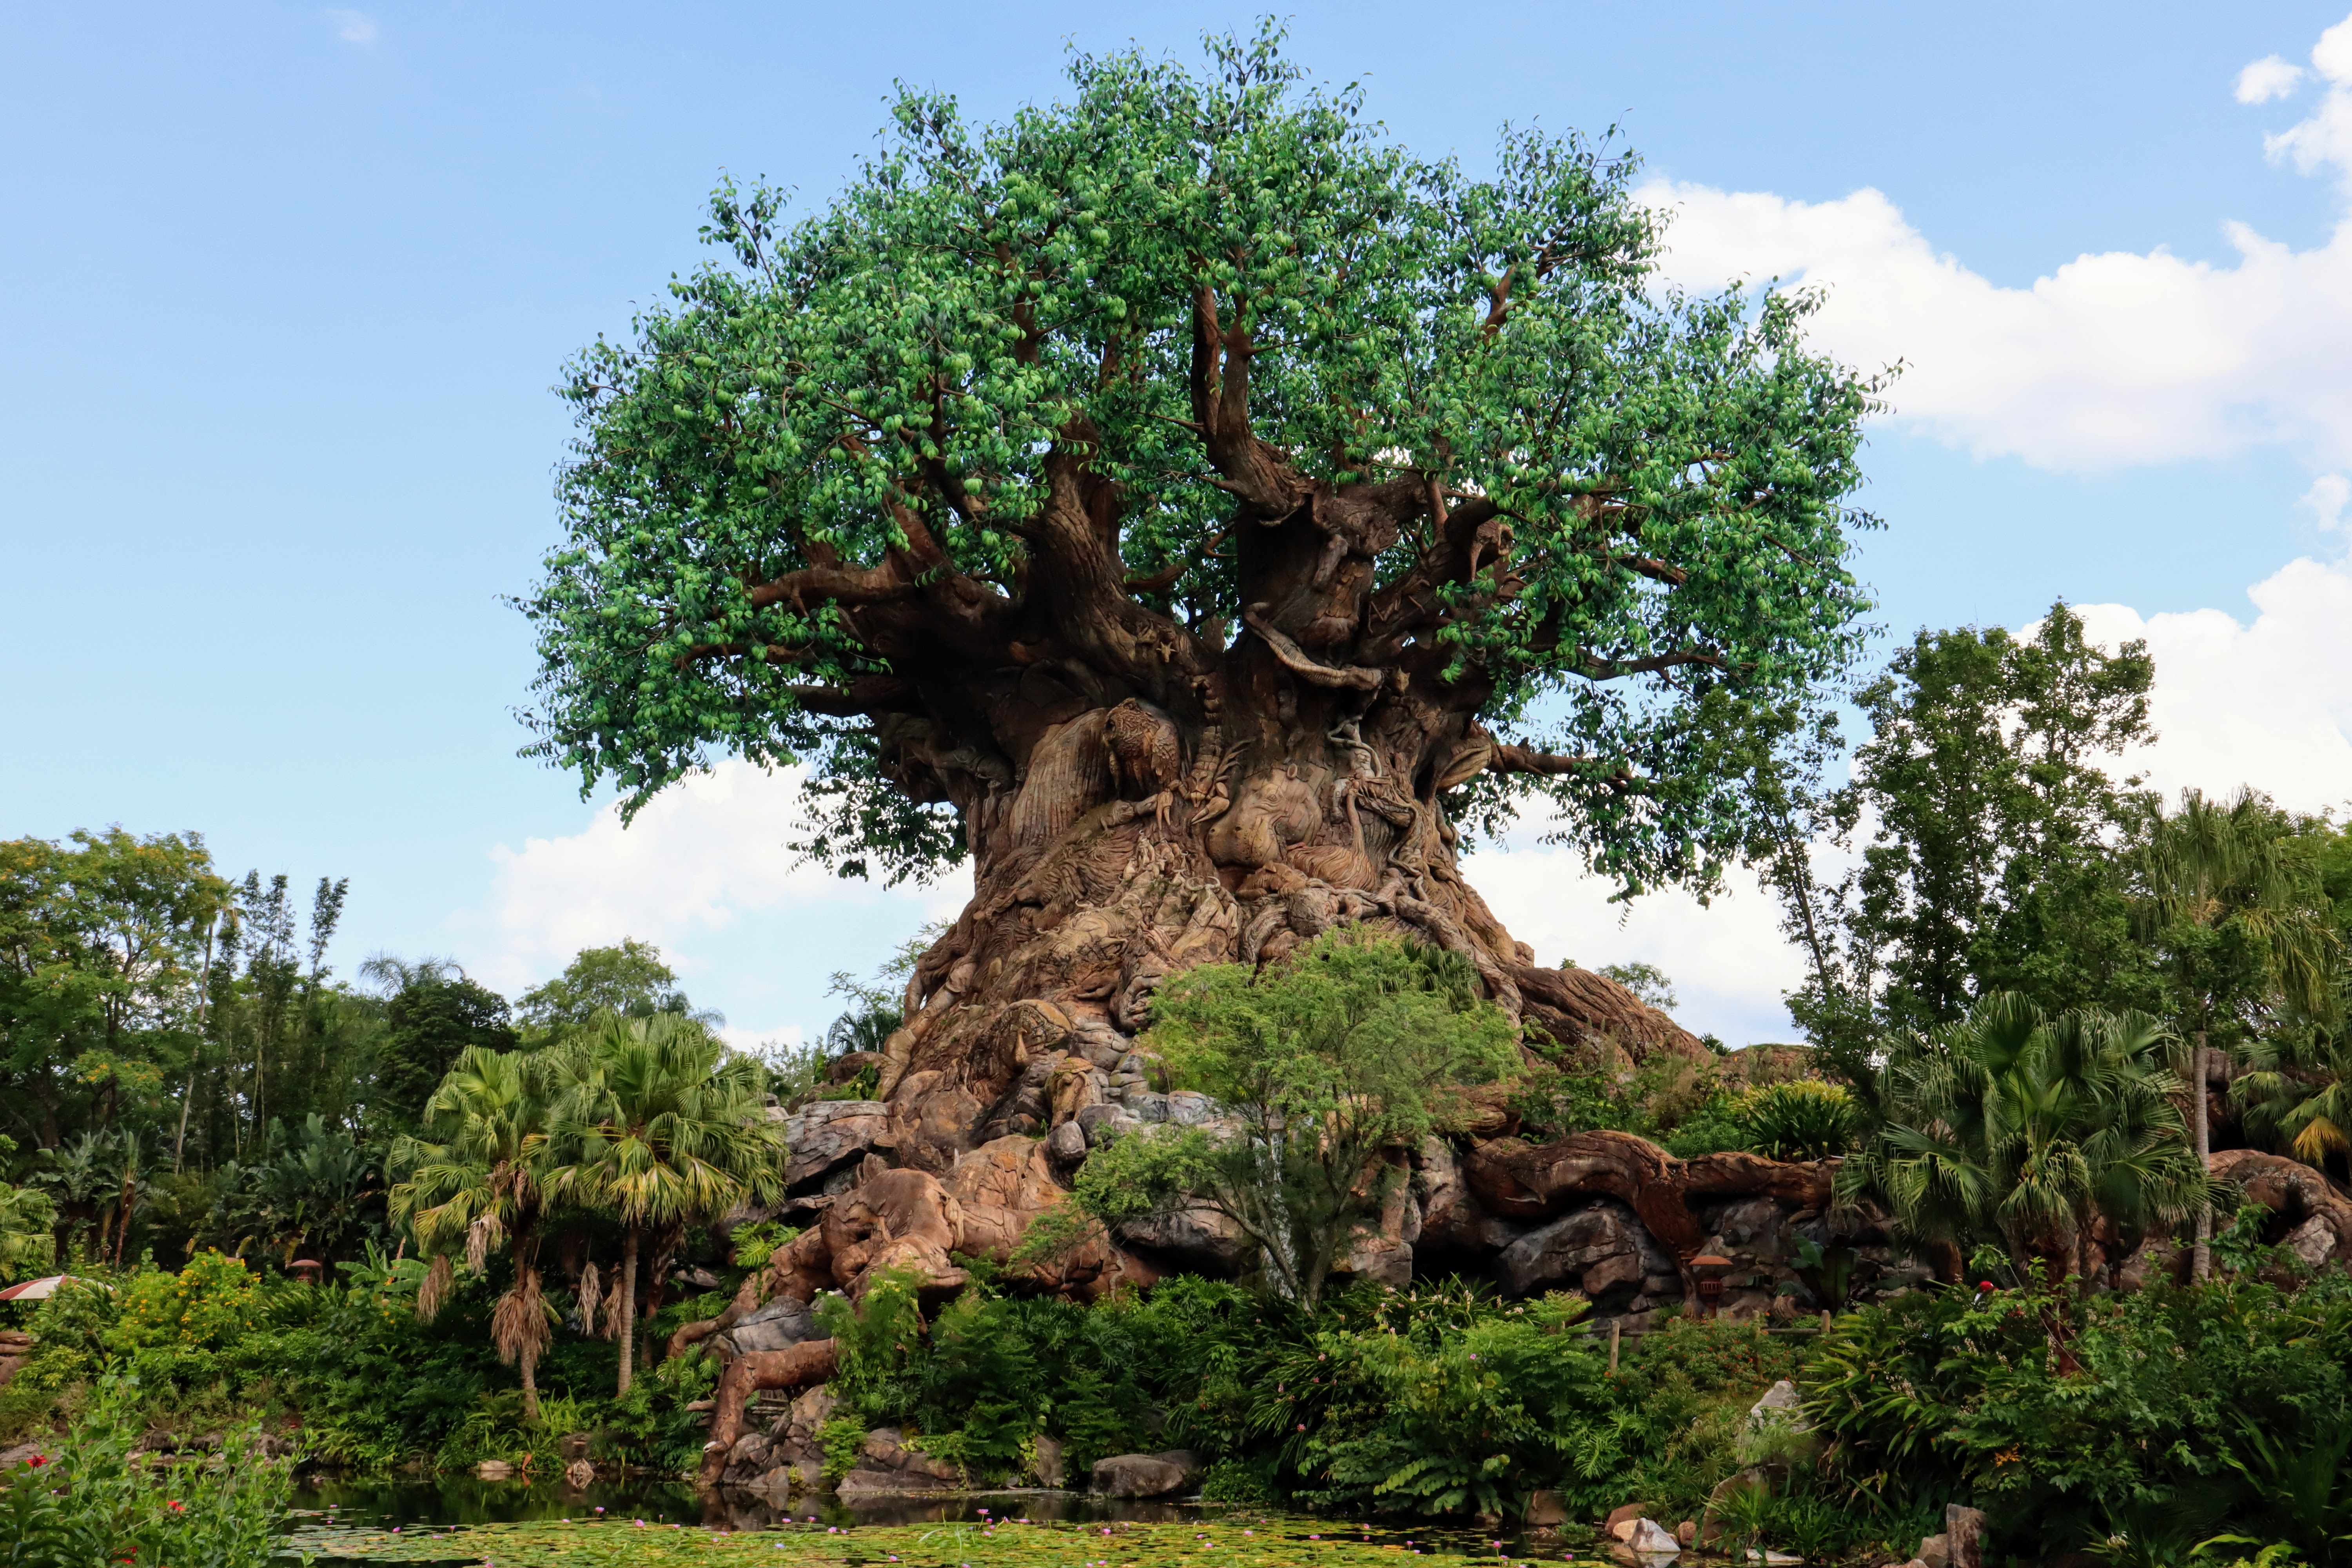 Once Upon a Date: April 22, 1998 - Animal Kingdom opens at Walt Disney World  - Travel to the Magic